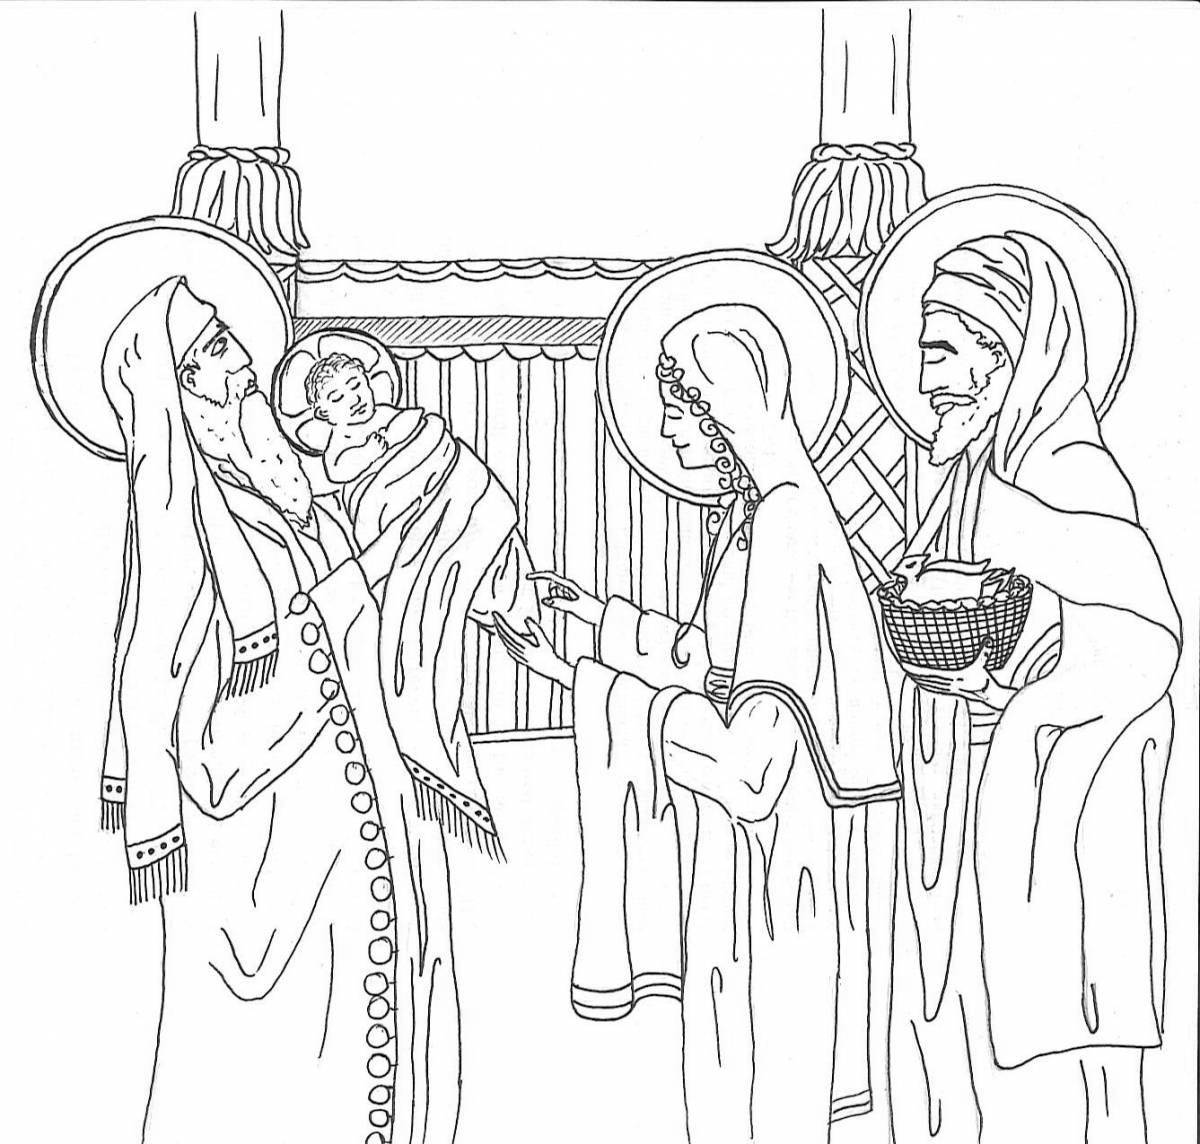 Coloring page joyful meeting of the Lord